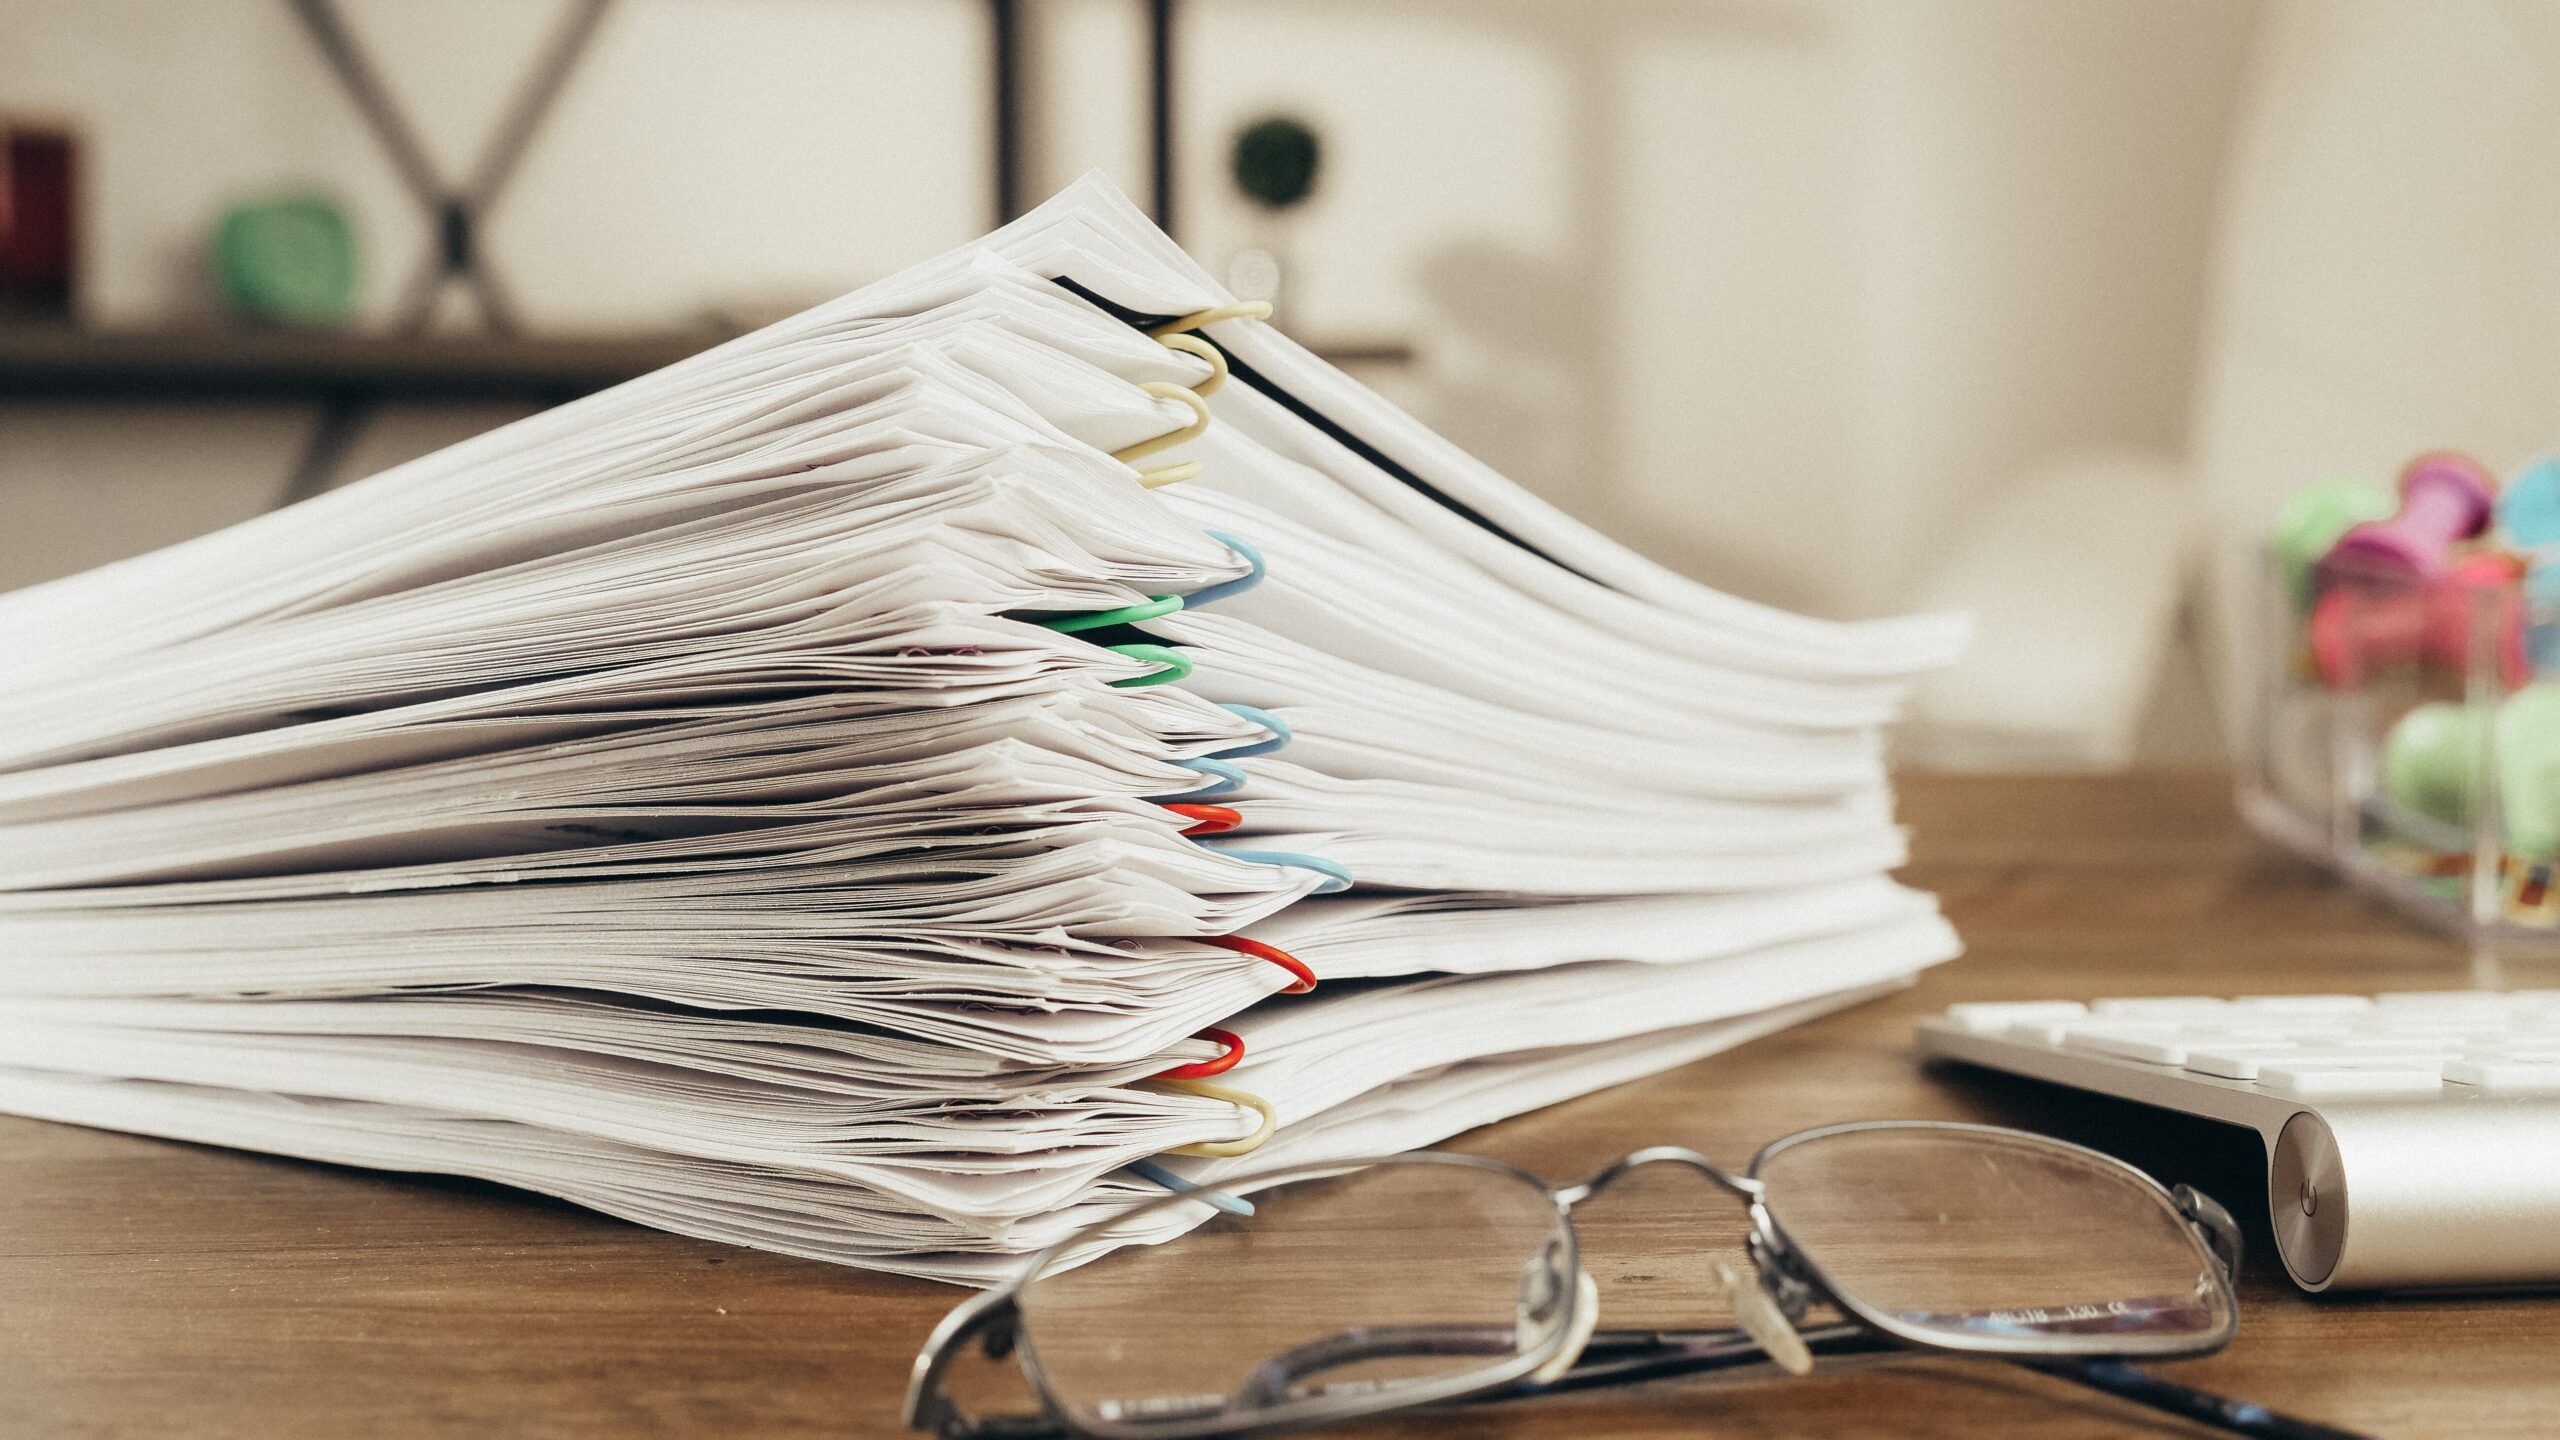 Startup shareholders agreement as a stack of documents